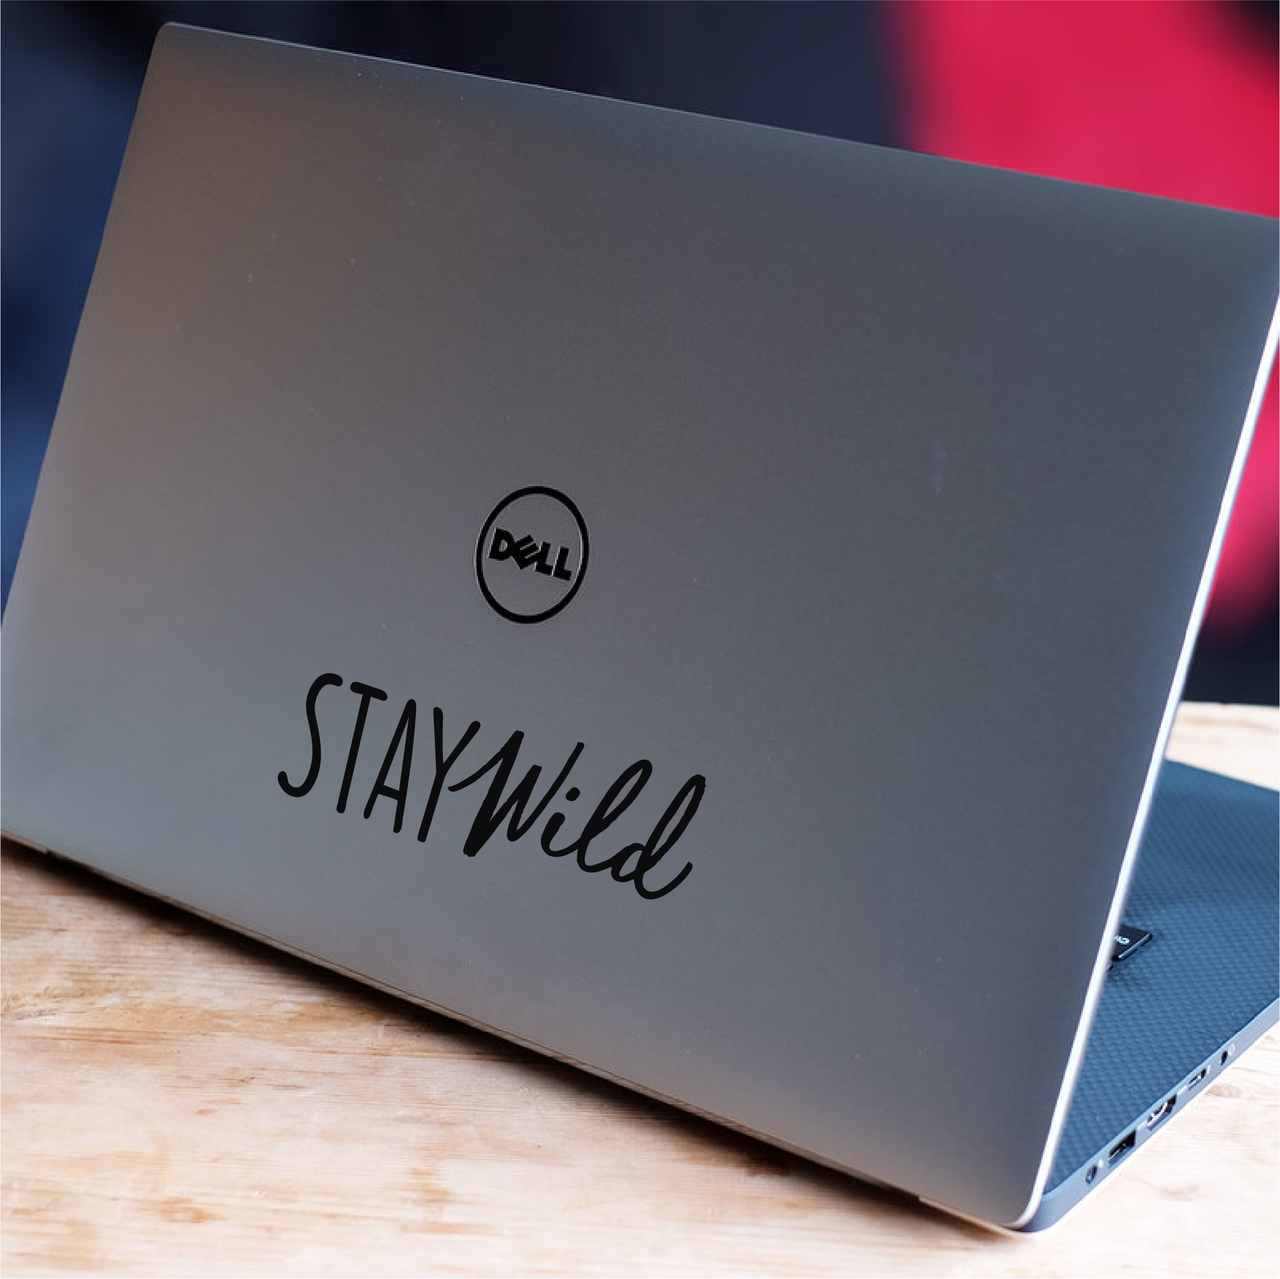 Stay Wild Laptop Decal